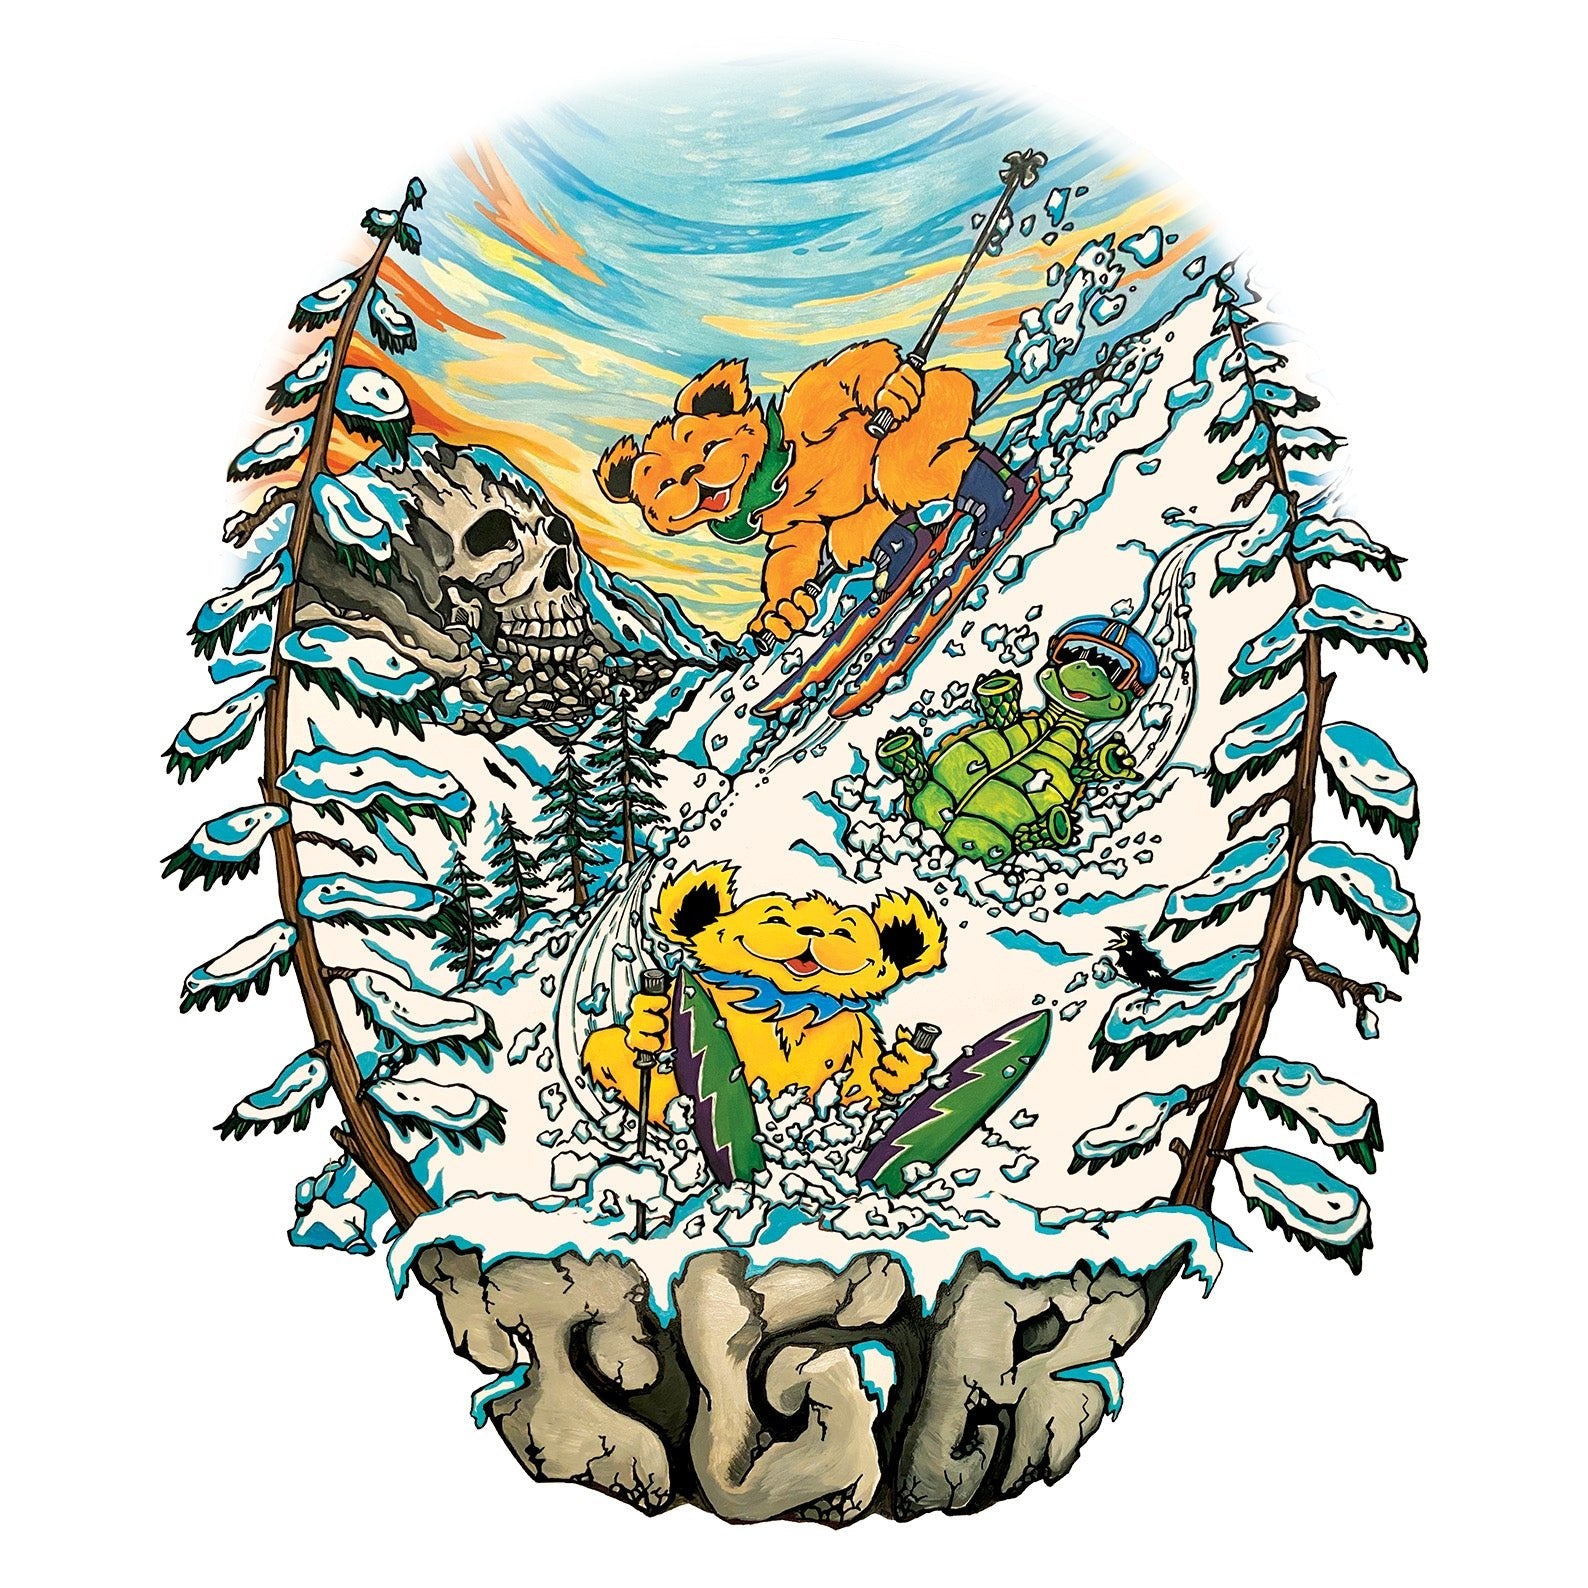 CLOSEUP of BACK Art: Alpenglow sky with two Grateful Dead Bears (one orange, one yellow)skiing with a Terrapin Turtle sliding down the hill on it's back. The scene is bordered by two snow covered pine trees and has TGR stone lettering on bottom border. Grateful Dead Iconography is mixed into the scene with Bolt skis and Skull cliffs.